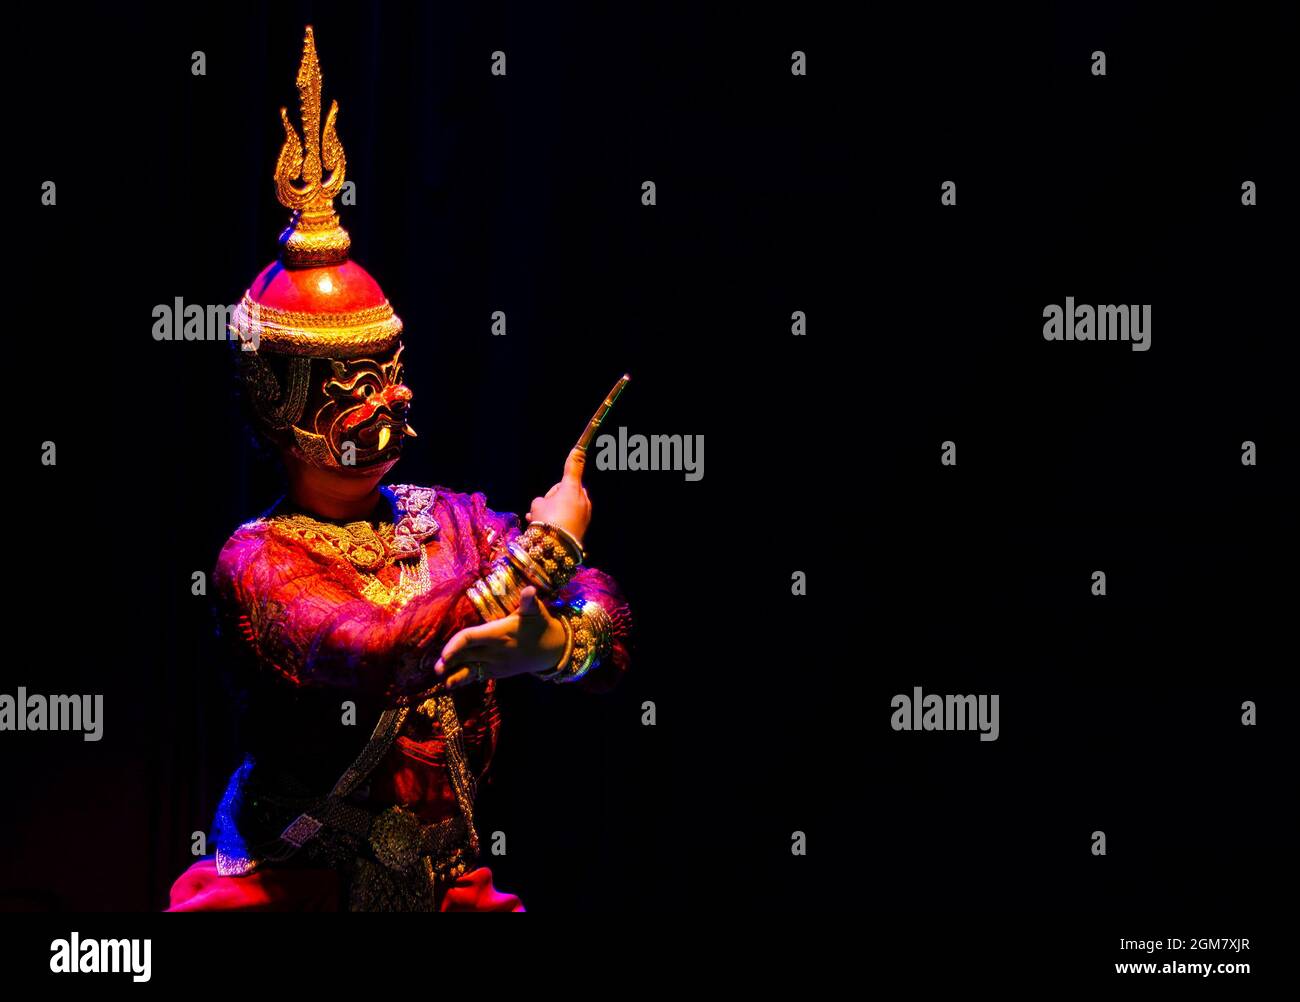 lakhon khol khmer masked dance performer in costume at phnom penh cambodia theater stage Stock Photo